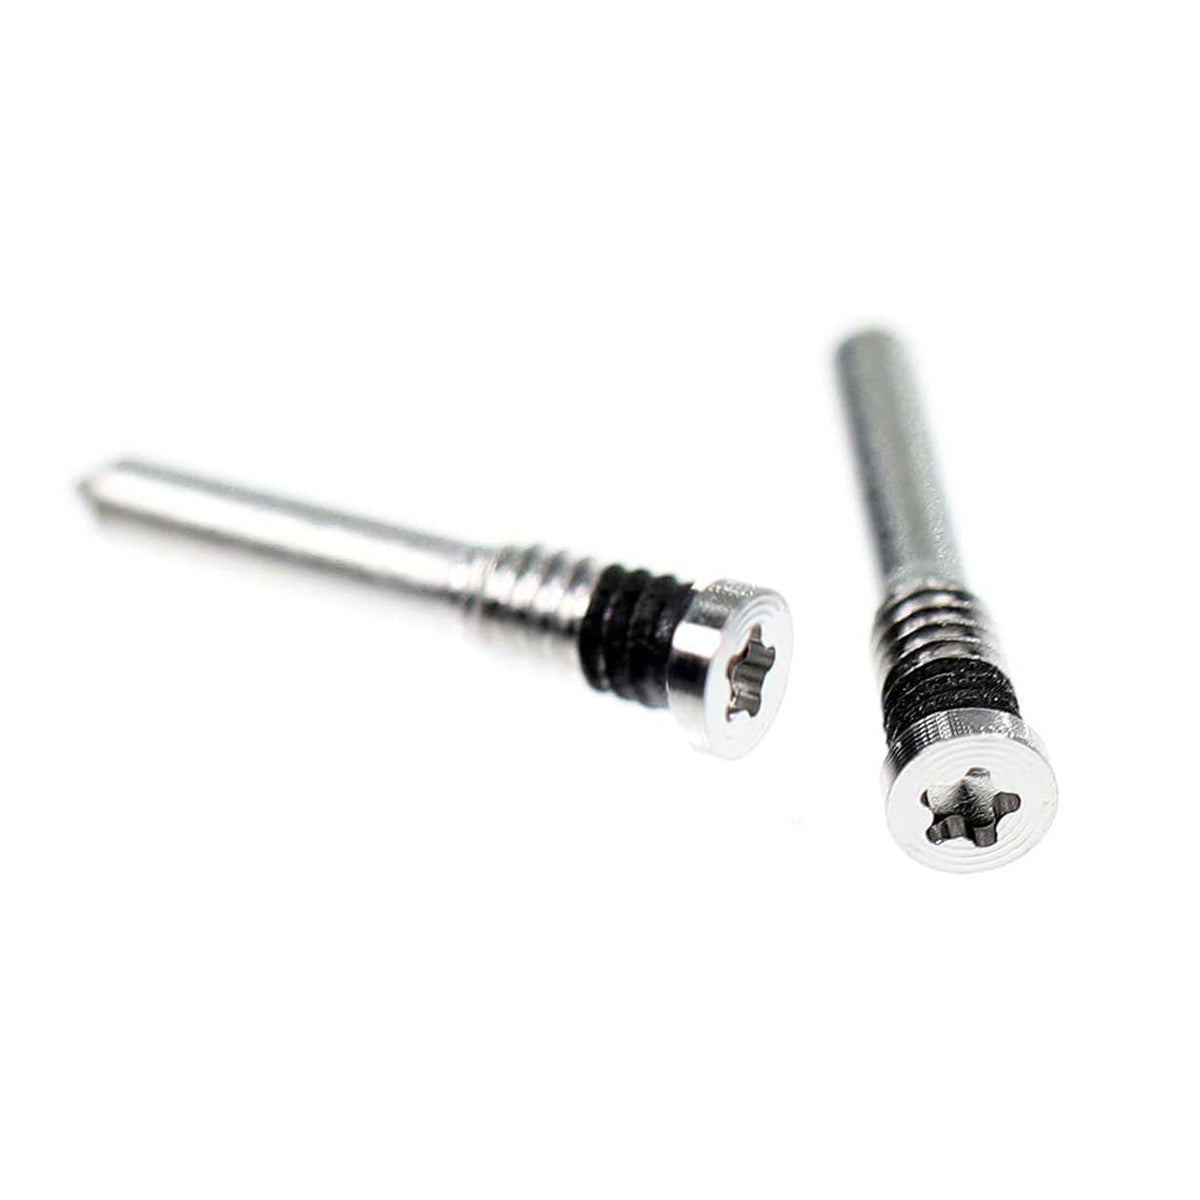 Replacement for iPhone 11-14 Pro Max Bottom Screw 2pcs/set - Silver